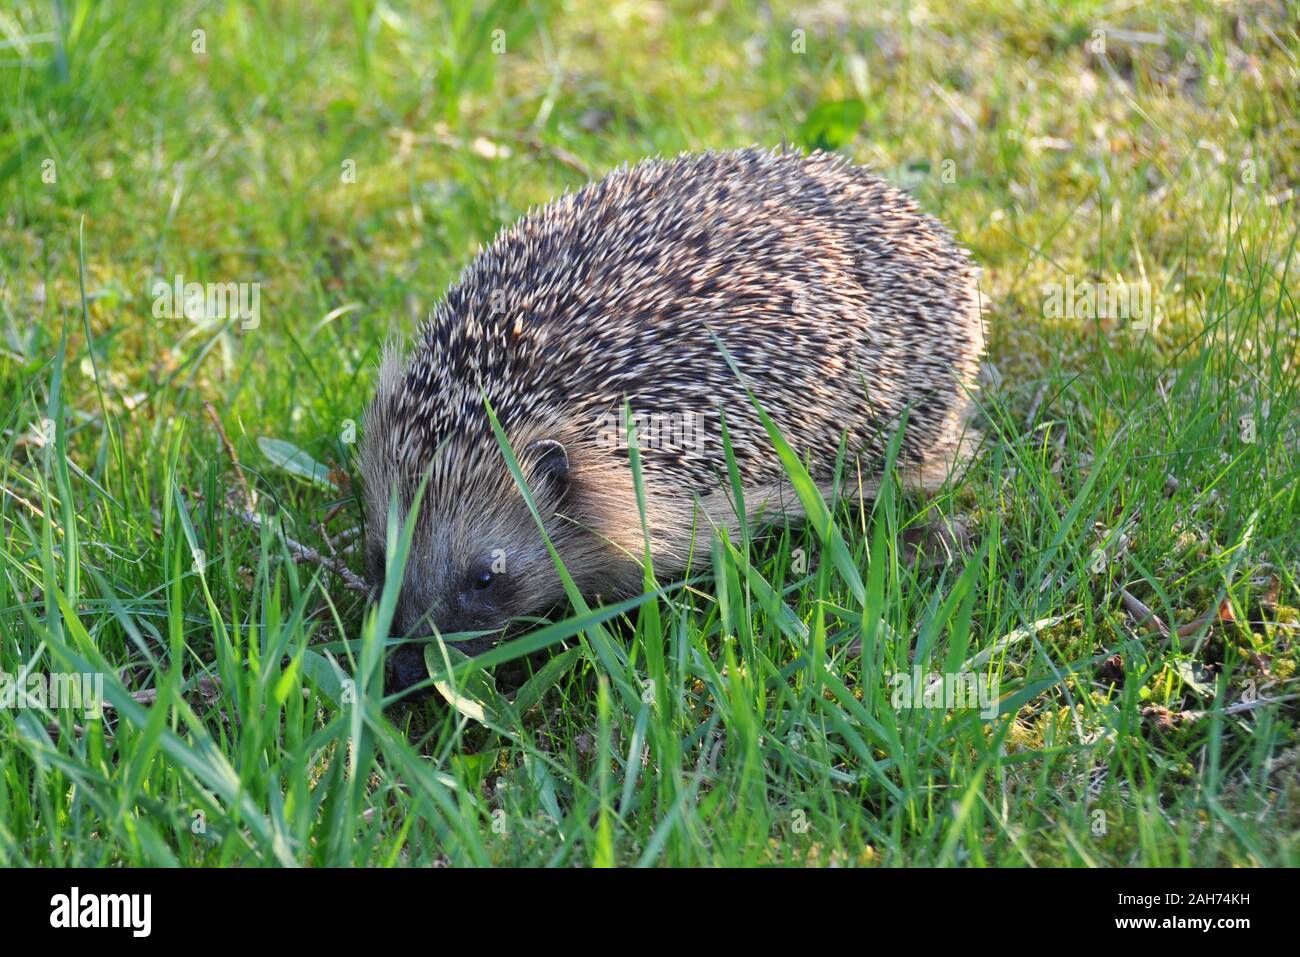 Hedgehog serching for food on a lawn Stock Photo